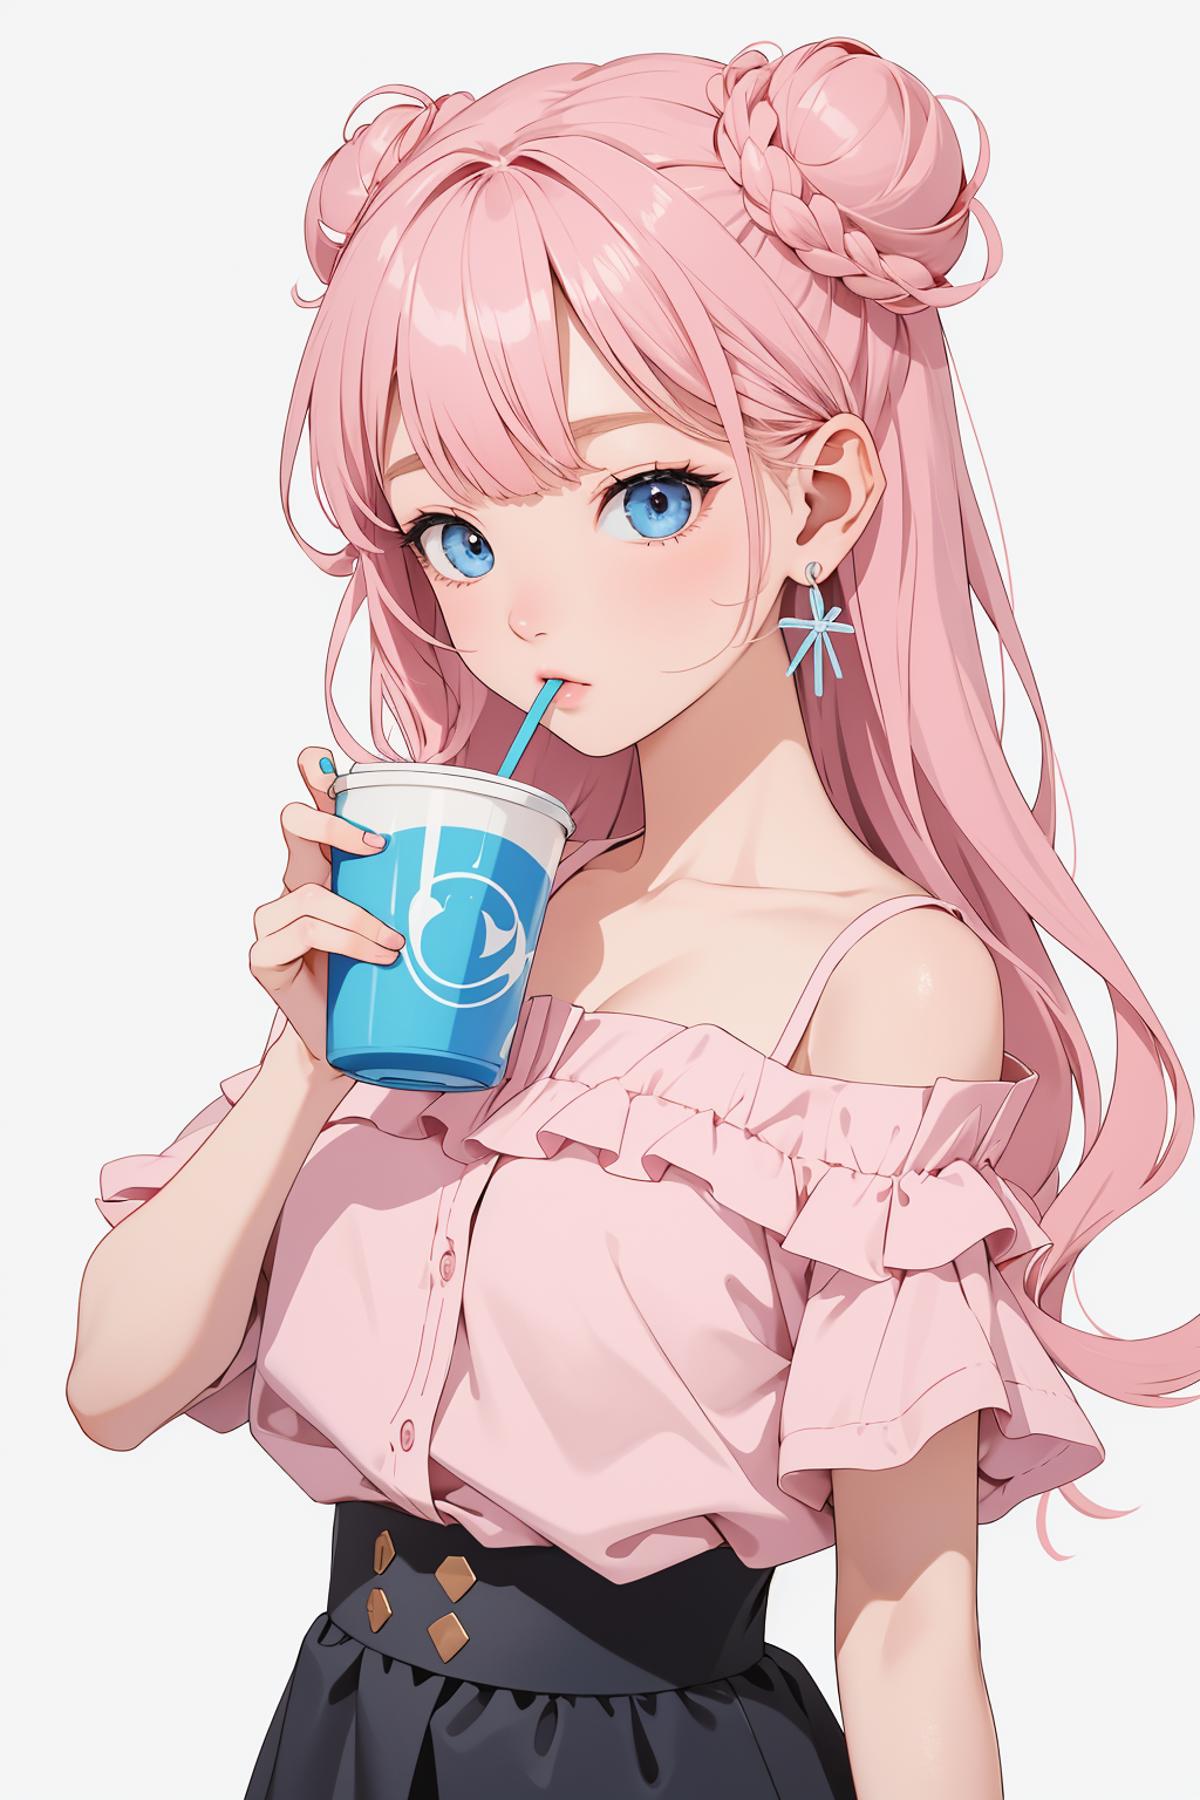 A cartoon image of a pink-haired girl with a blue cup.